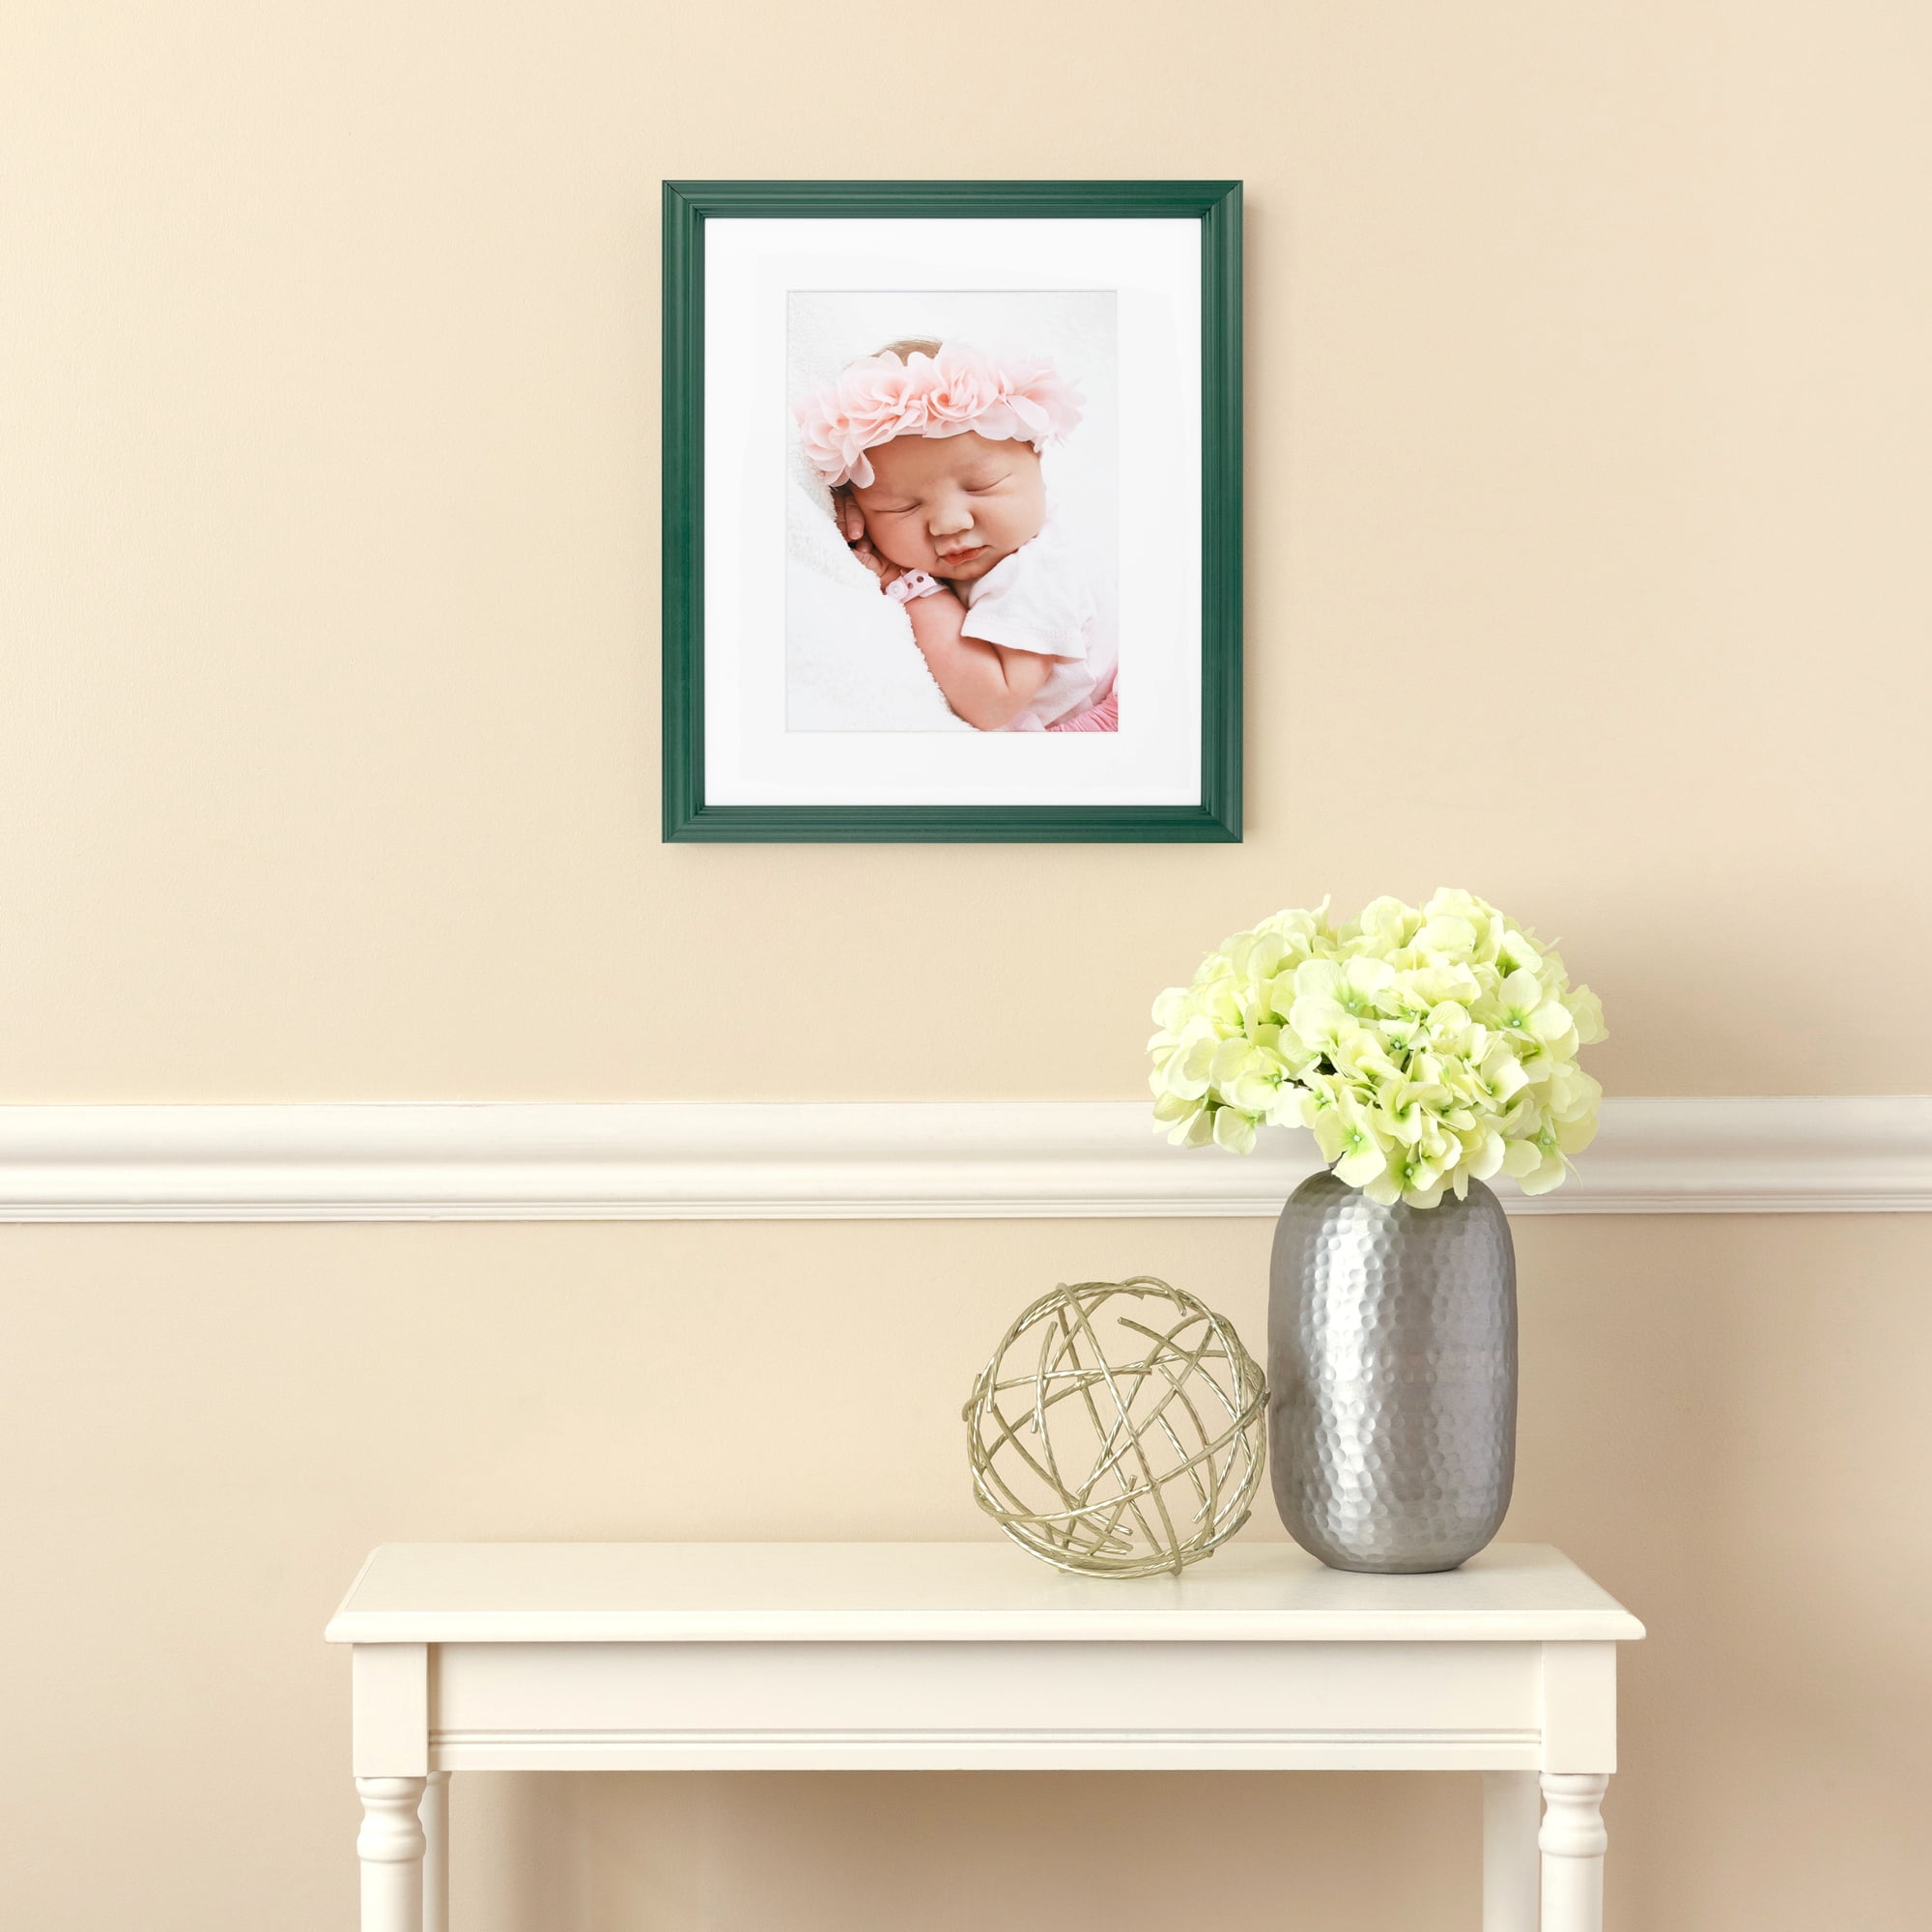 ArtToFrames 6x10 Inch Green Picture Frame, This 1.50 Inch Custom Wood  Poster Frame is Green - Comes with Foam Backing 3/16 inch and Regular Glass